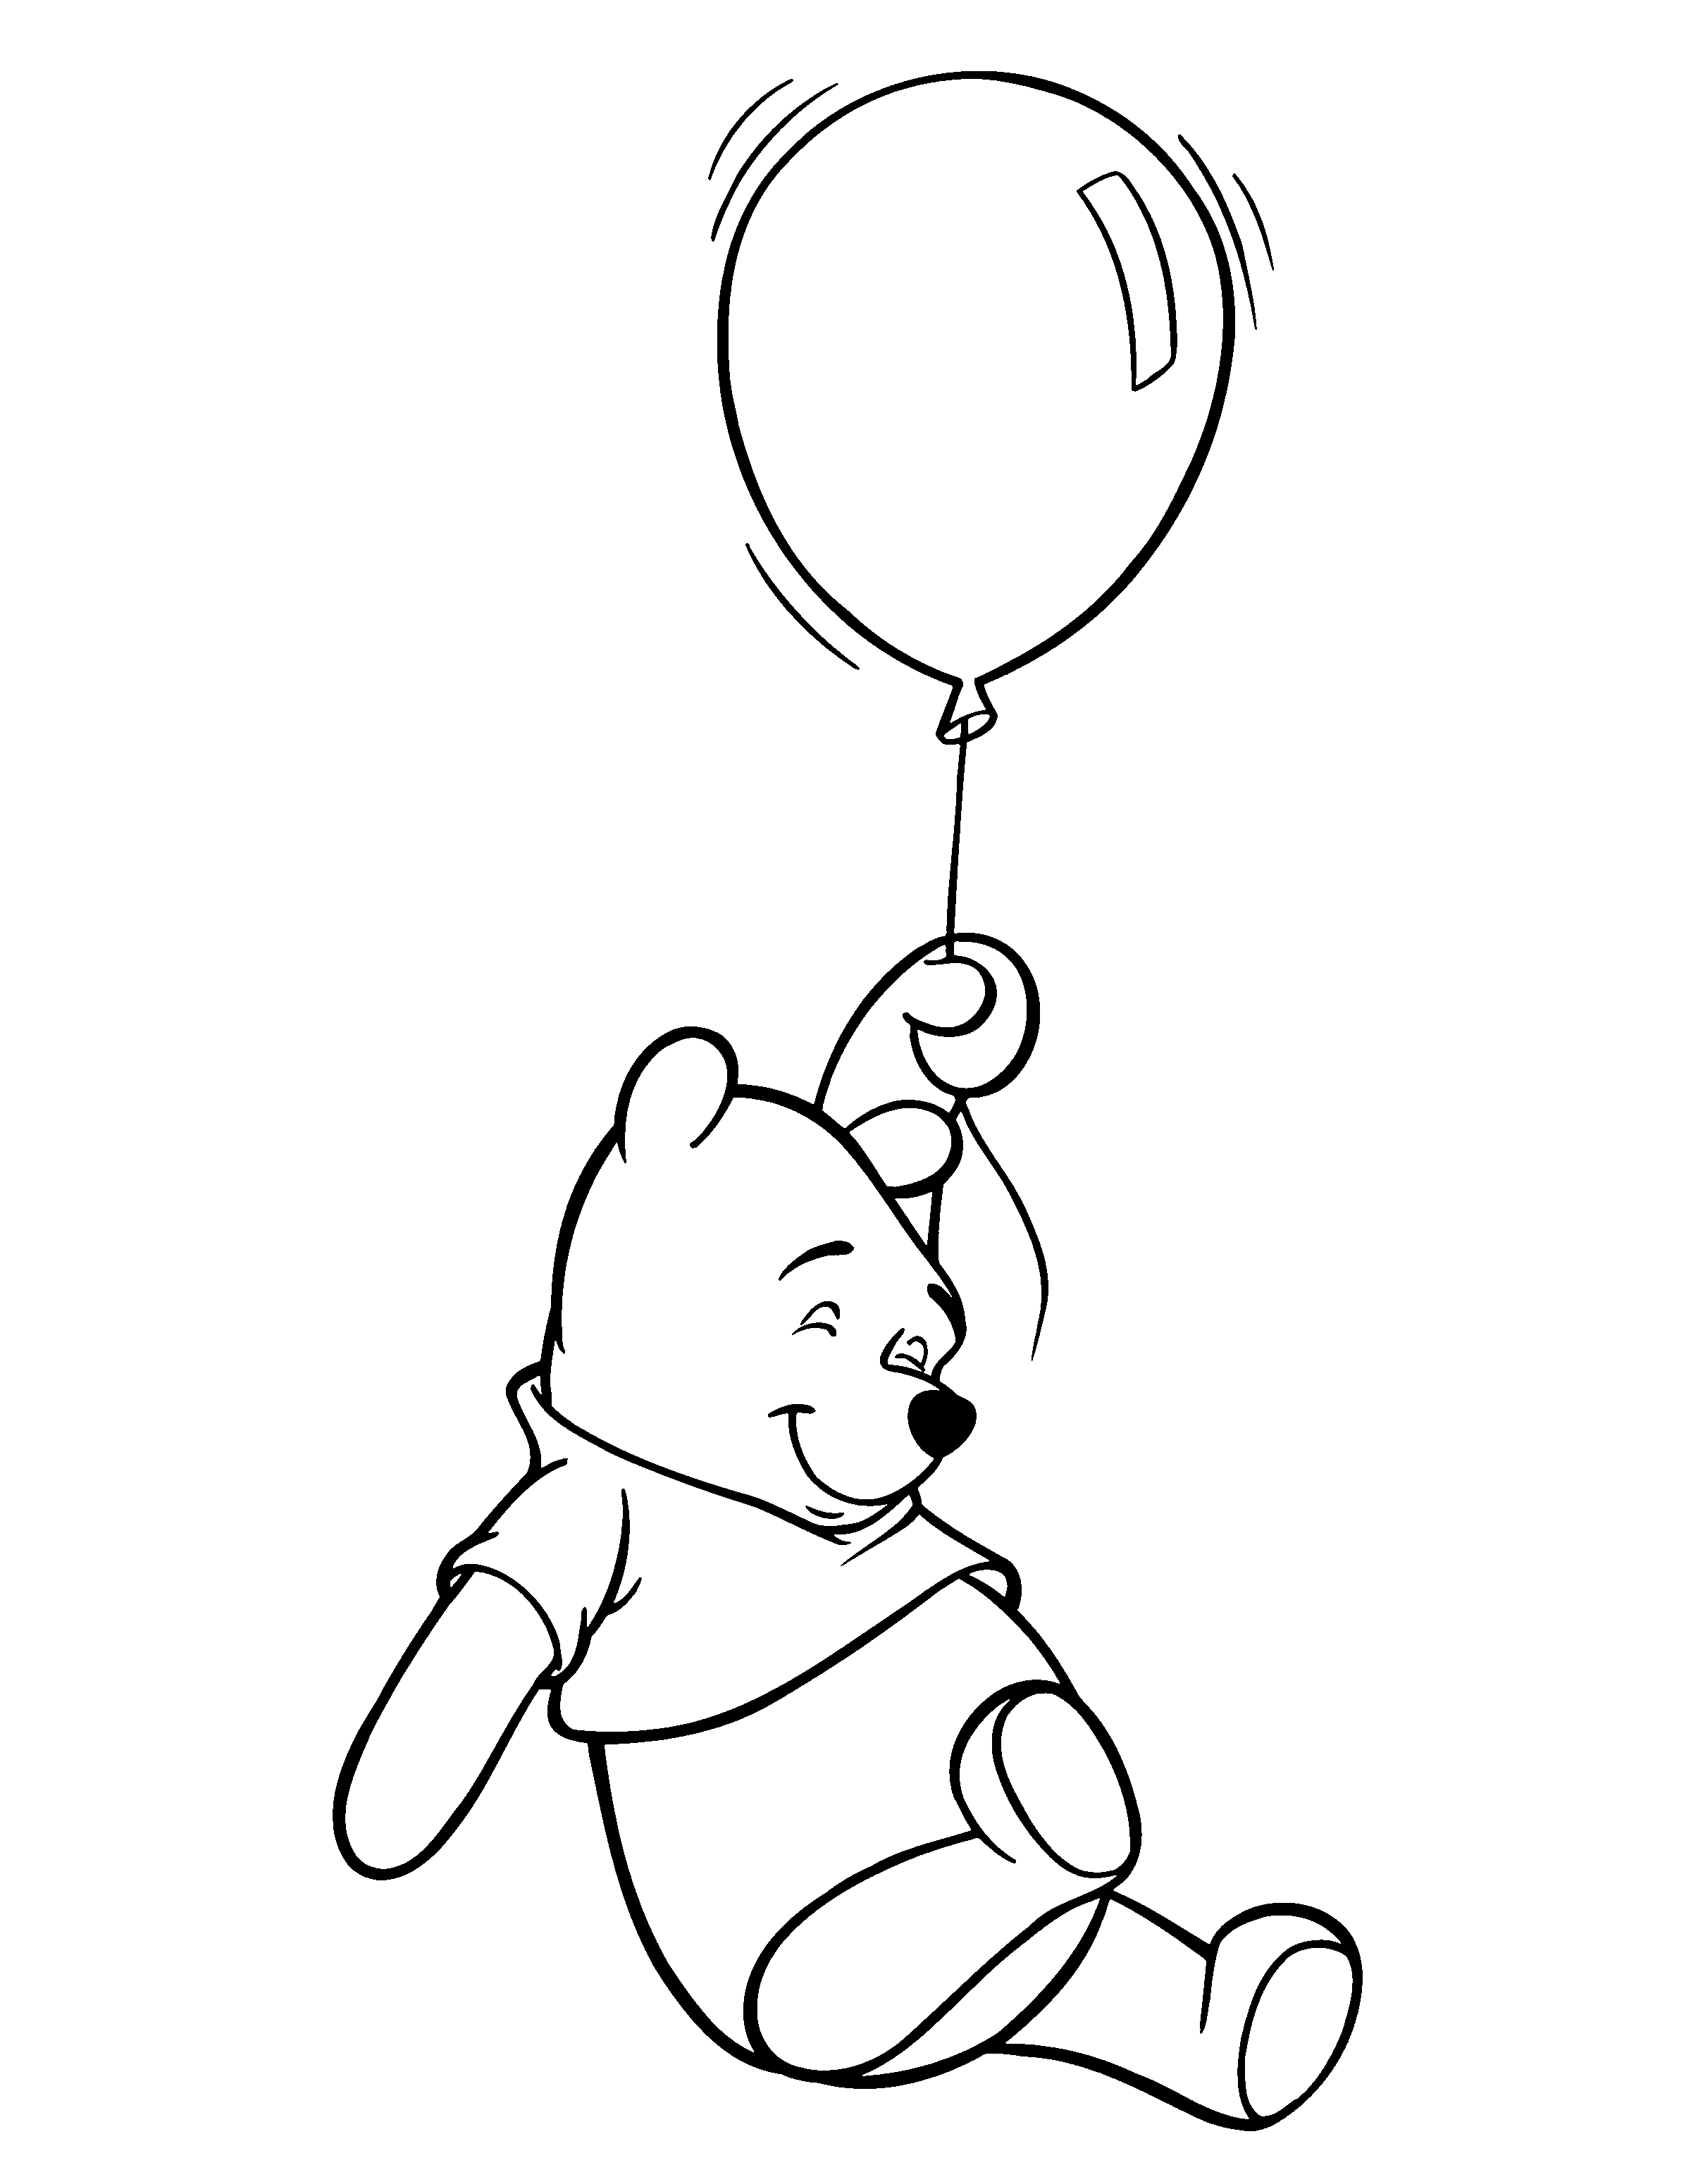 Happy Birthday Coloring Pages For Friends Winnie Pooh Happy Fly Coloring Page And Flying Ballons Pages Best